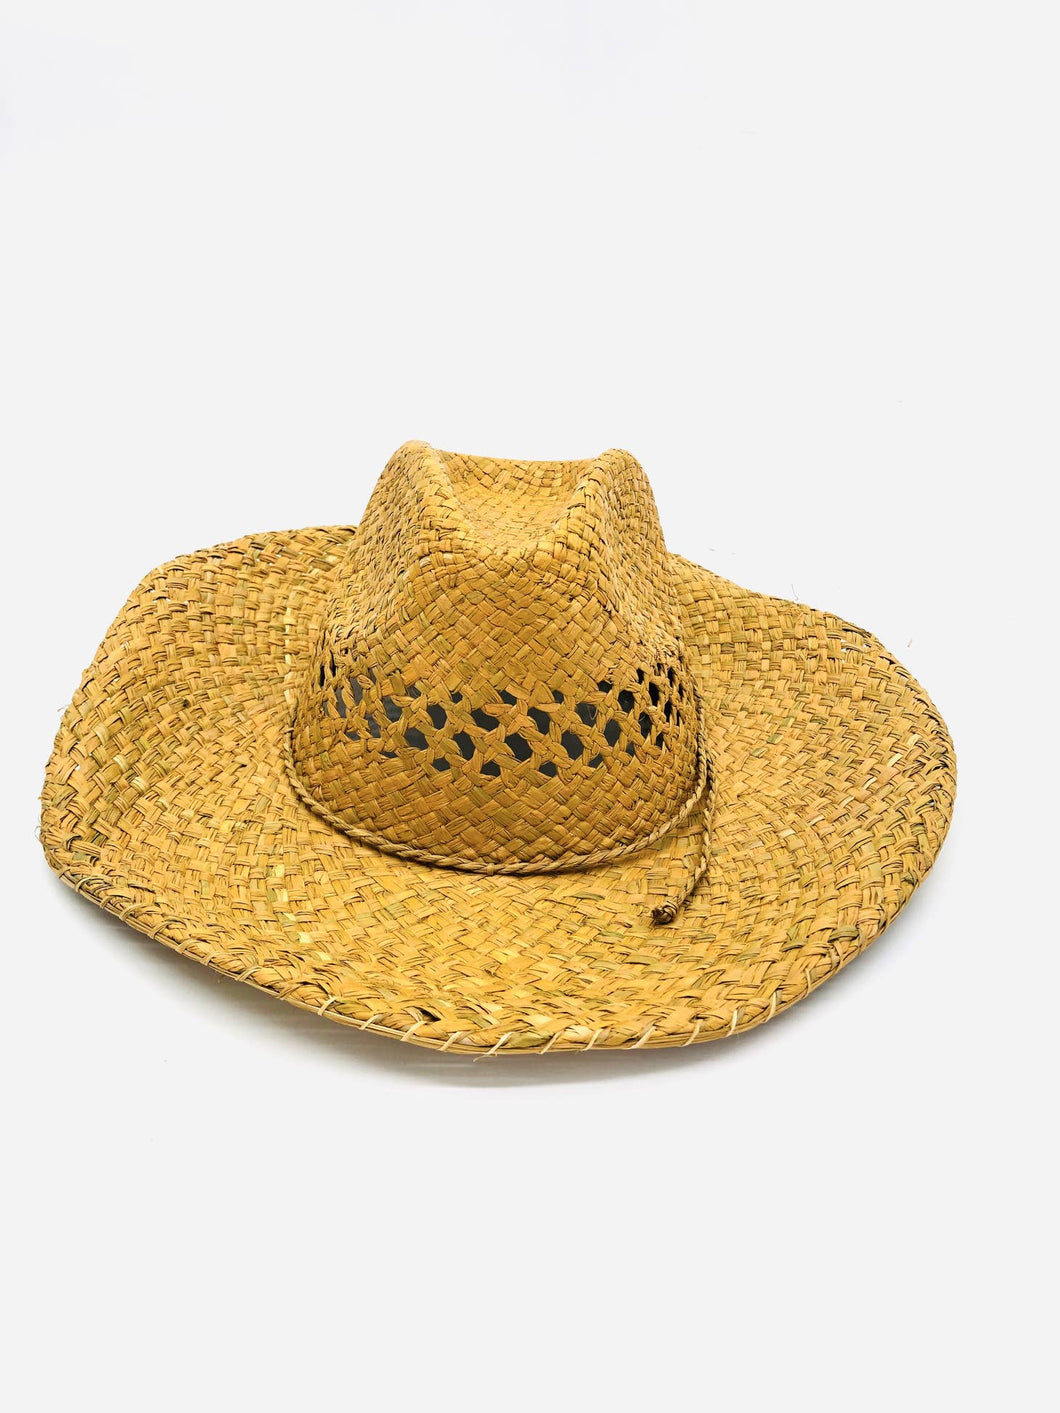 Shebobo Macho Straw Cowboy Hat with Adjustable Wire Rim *2 Colors Available